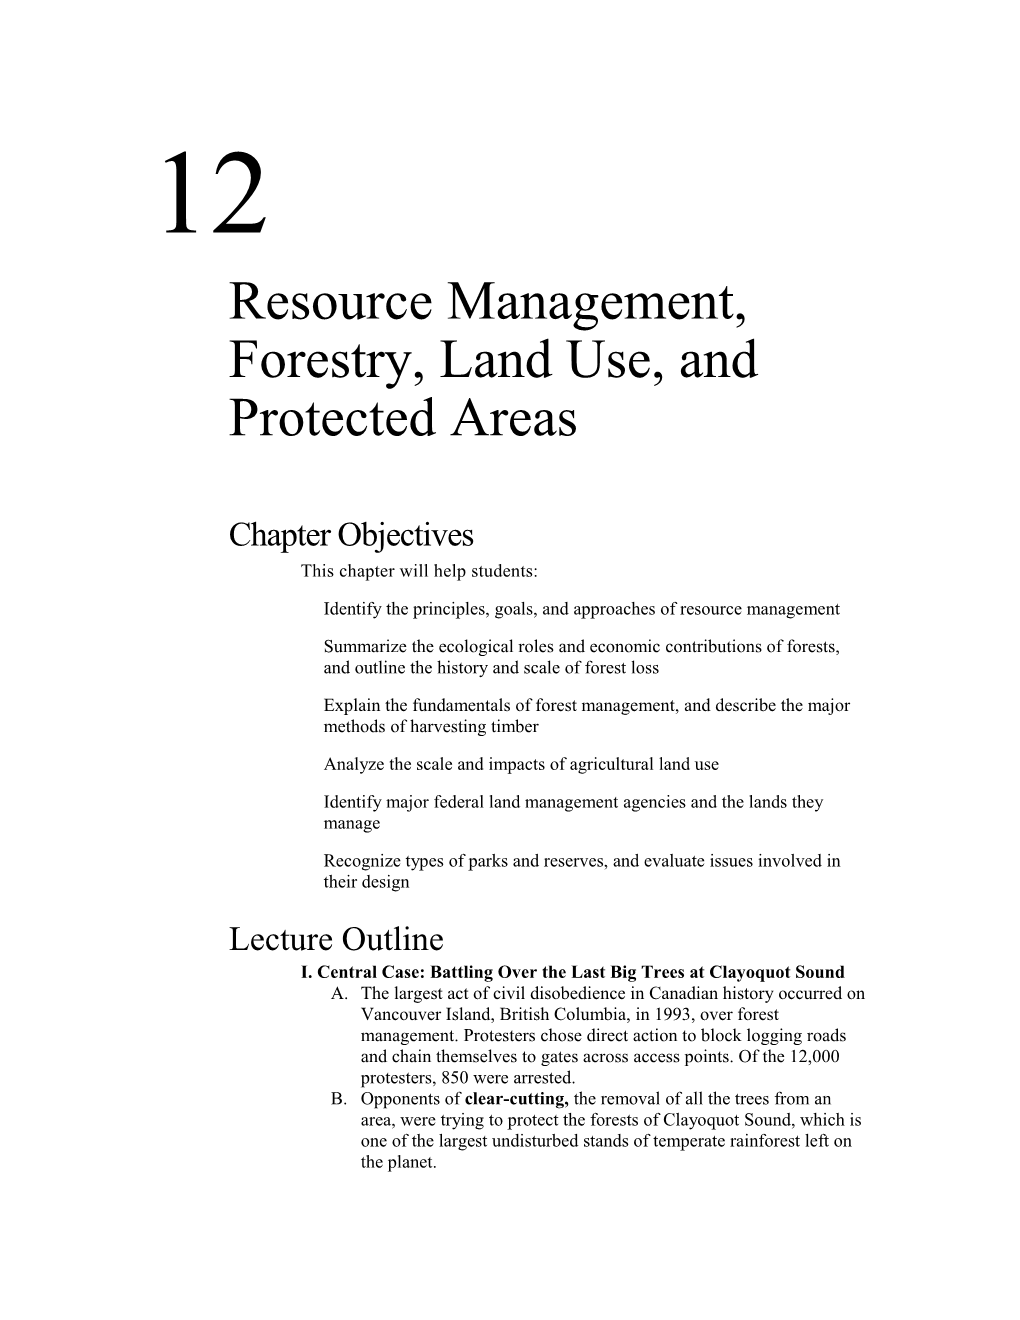 Resource Management, Forestry, Land Use, and Protected Areas